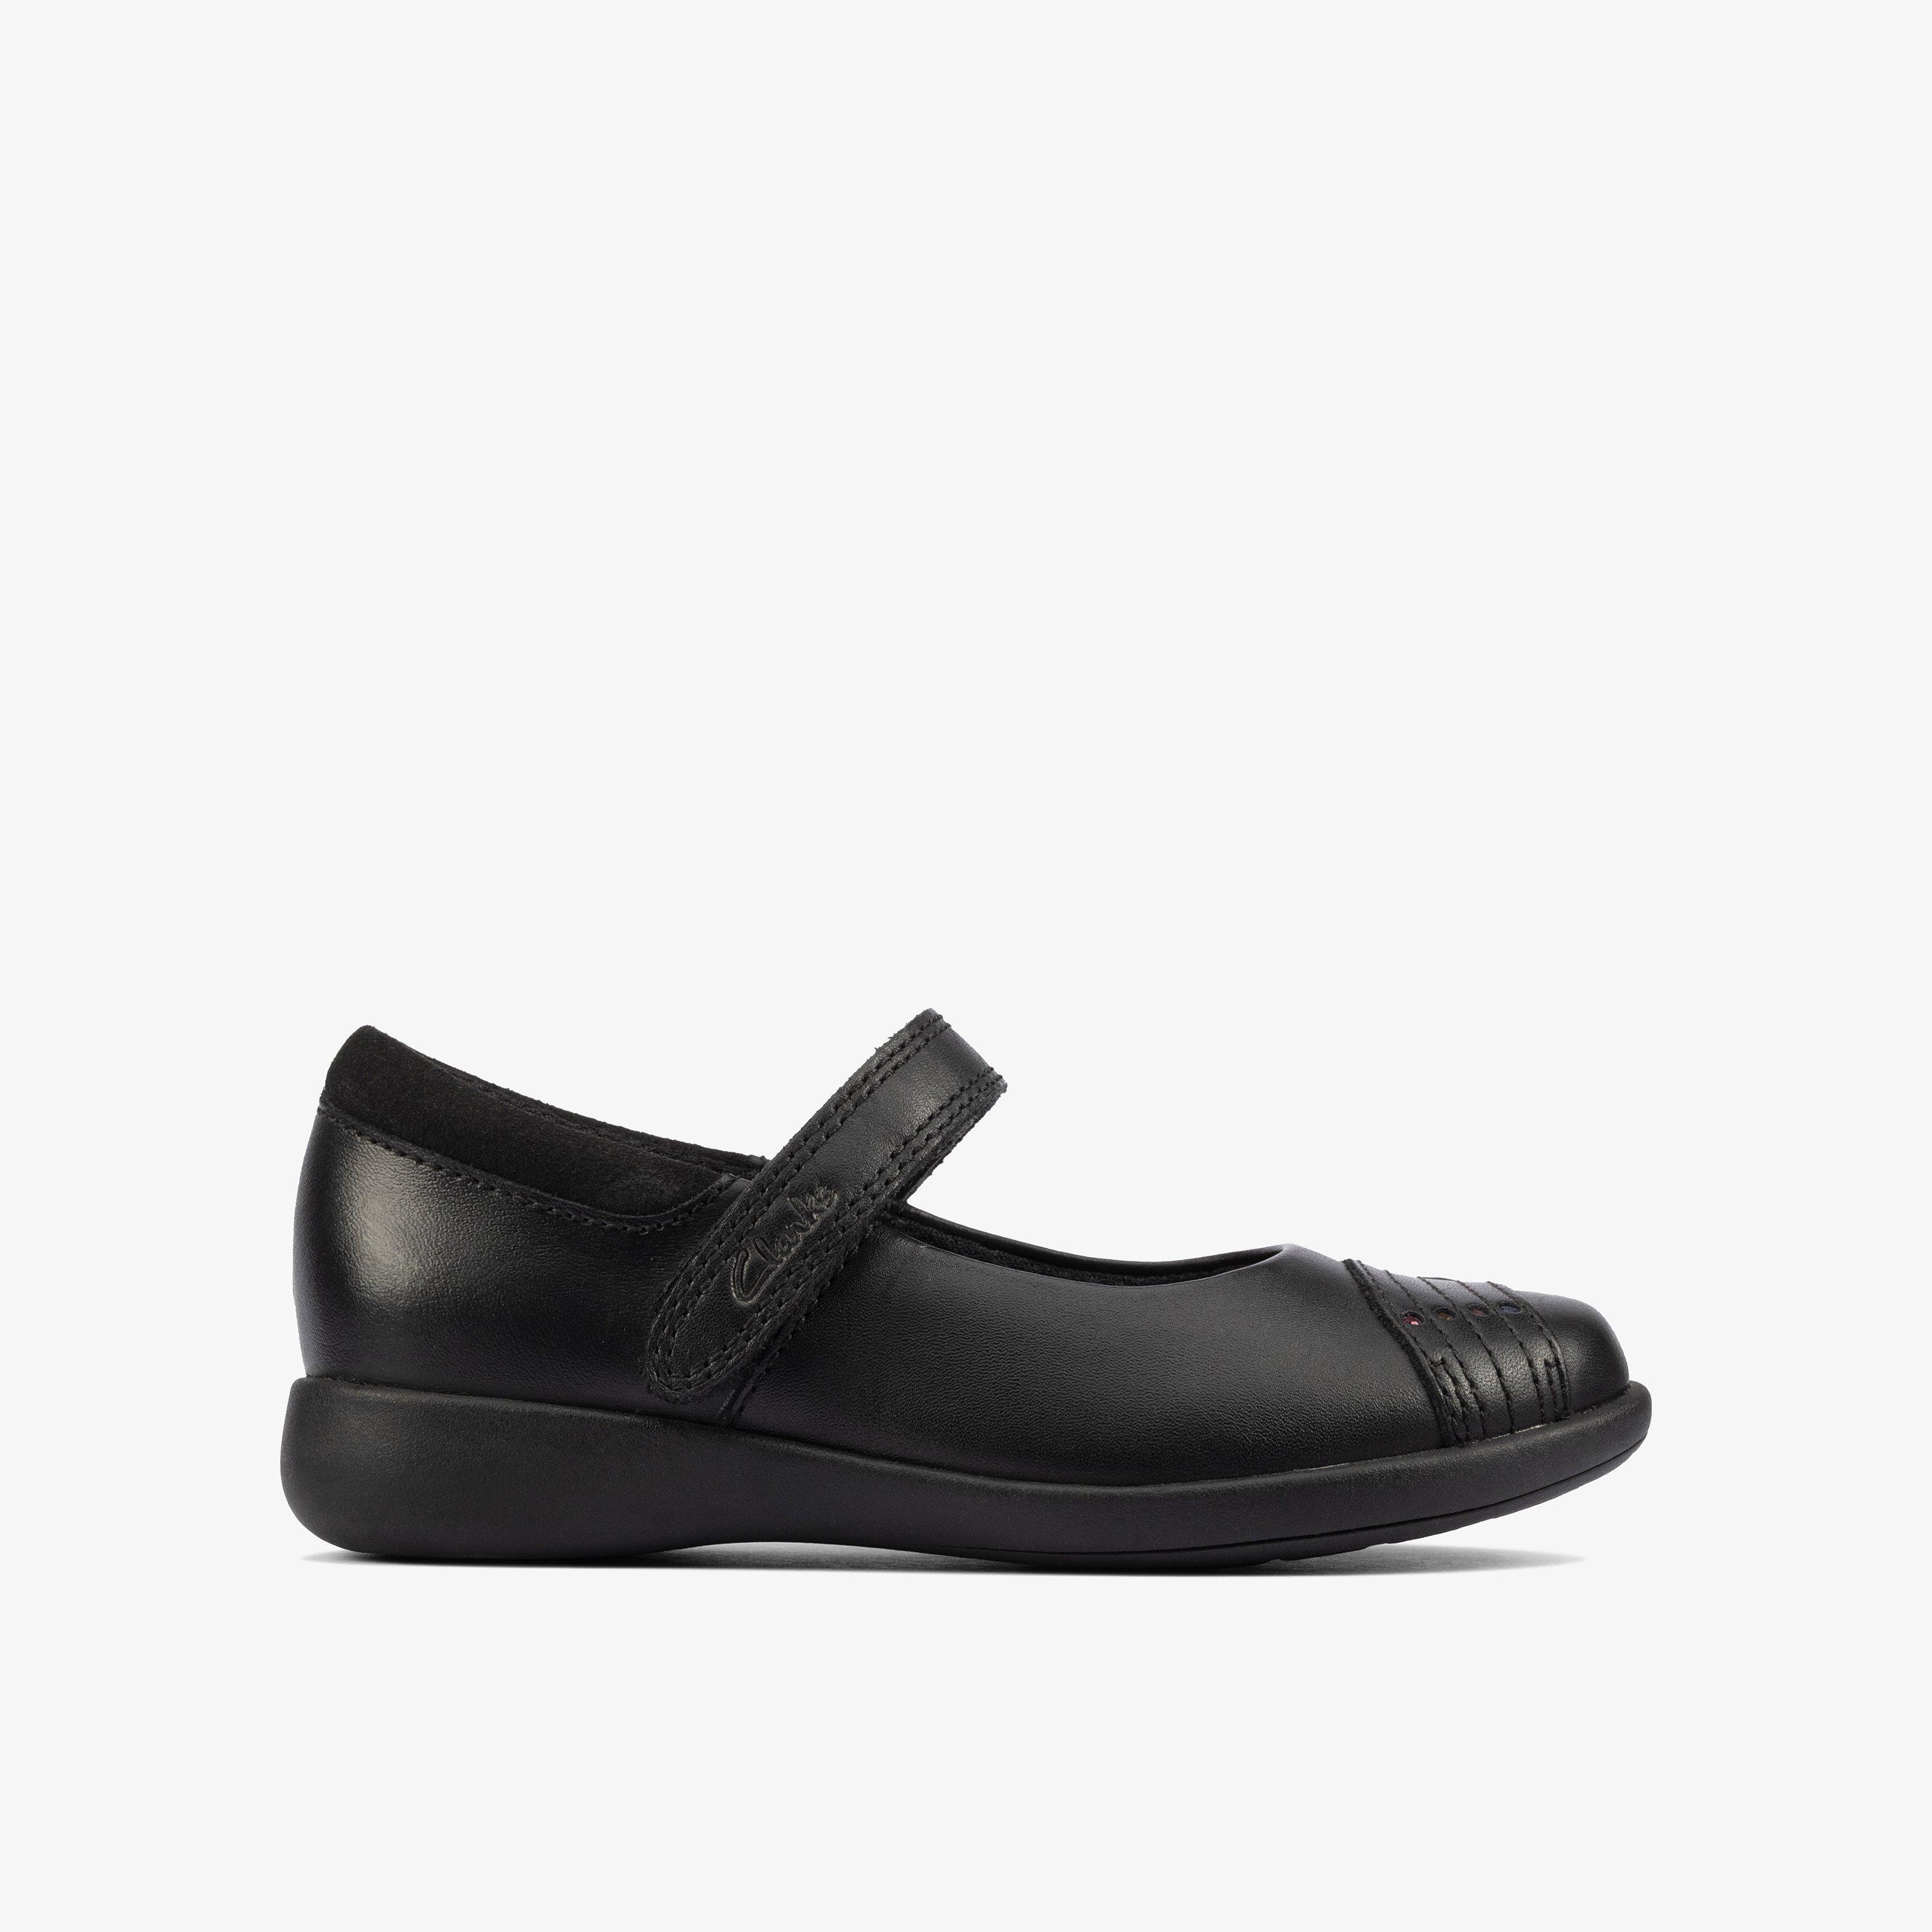 Kids Etch Beam T Black Leather Shoes | Clarks Outlet